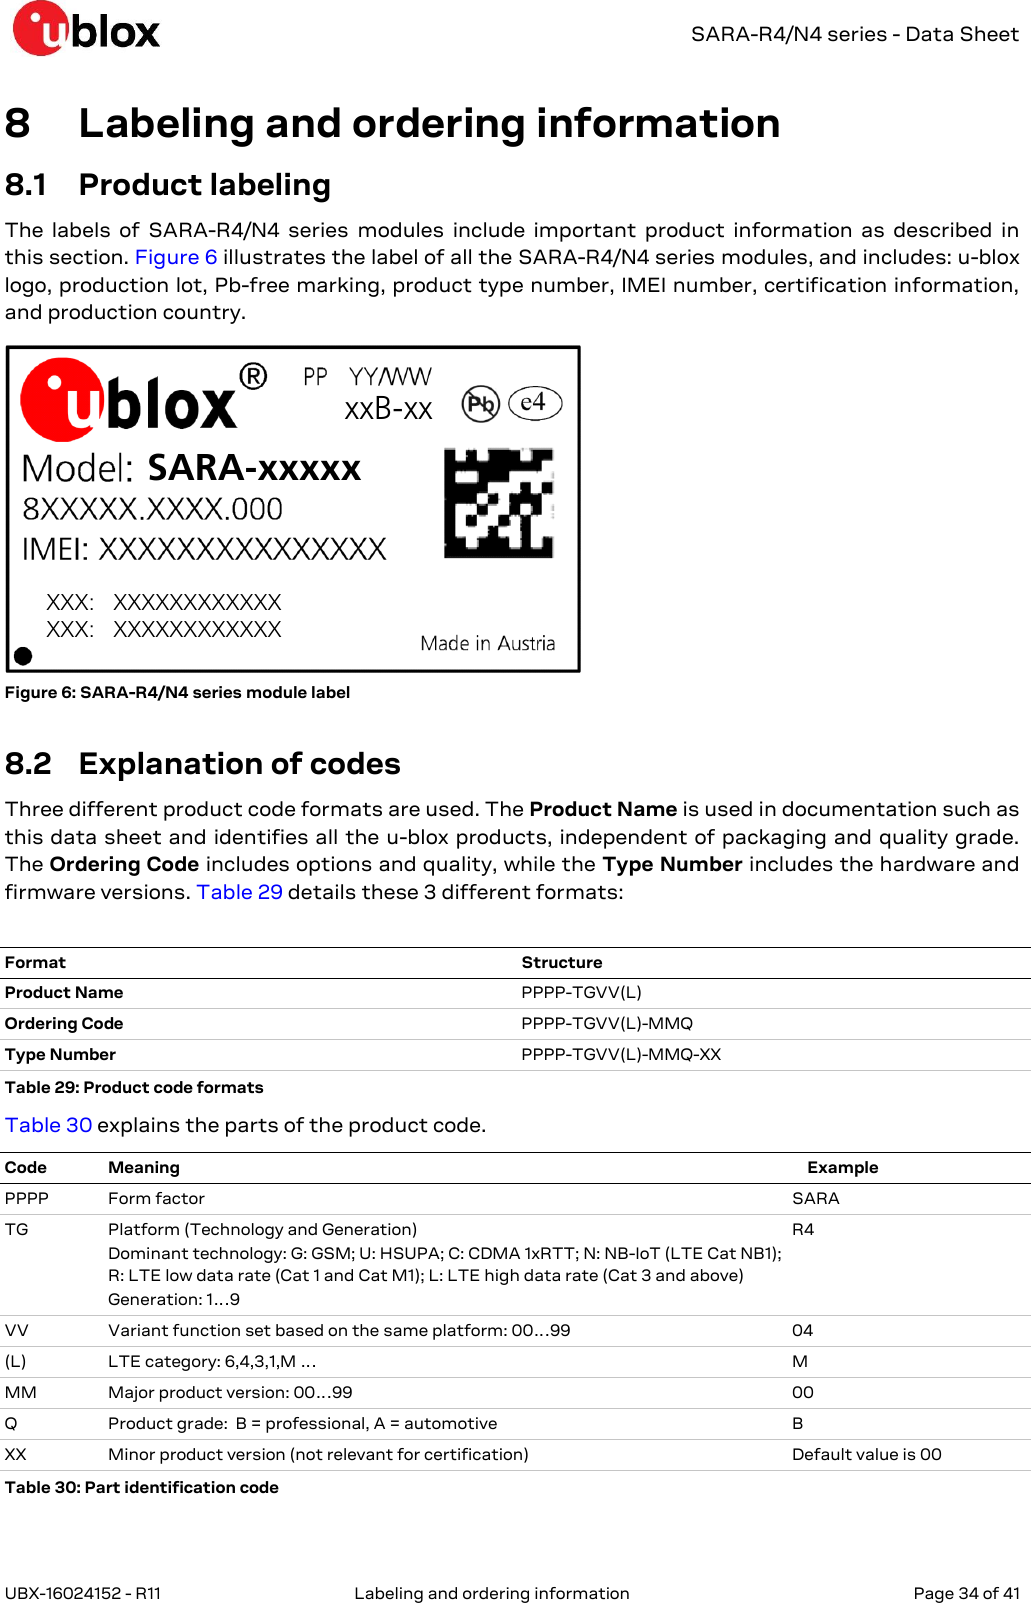   SARA-R4/N4 series - Data Sheet UBX-16024152 - R11  Labeling and ordering information   Page 34 of 41      8 Labeling and ordering information 8.1 Product labeling The  labels  of  SARA-R4/N4  series  modules  include  important  product  information  as  described  in this section. Figure 6 illustrates the label of all the SARA-R4/N4 series modules, and includes: u-blox logo, production lot, Pb-free marking, product type number, IMEI number, certification information, and production country. SARA-xxxxxxxB-xxXXX:   XXXXXXXXXXXXXXX:   XXXXXXXXXXXX     Figure 6: SARA-R4/N4 series module label  8.2 Explanation of codes Three different product code formats are used. The Product Name is used in documentation such as this data sheet and identifies all the u-blox products, independent of packaging and quality grade. The Ordering Code includes options and quality, while the Type Number includes the hardware and firmware versions. Table 29 details these 3 different formats:   Format Structure Product Name PPPP-TGVV(L) Ordering Code PPPP-TGVV(L)-MMQ Type Number PPPP-TGVV(L)-MMQ-XX Table 29: Product code formats Table 30 explains the parts of the product code. Code Meaning Example PPPP Form factor  SARA TG Platform (Technology and Generation) Dominant technology: G: GSM; U: HSUPA; C: CDMA 1xRTT; N: NB-IoT (LTE Cat NB1); R: LTE low data rate (Cat 1 and Cat M1); L: LTE high data rate (Cat 3 and above) Generation: 1…9 R4 VV Variant function set based on the same platform: 00…99 04 (L) LTE category: 6,4,3,1,M … M MM Major product version: 00…99 00 Q Product grade:  B = professional, A = automotive B XX Minor product version (not relevant for certification) Default value is 00 Table 30: Part identification code  